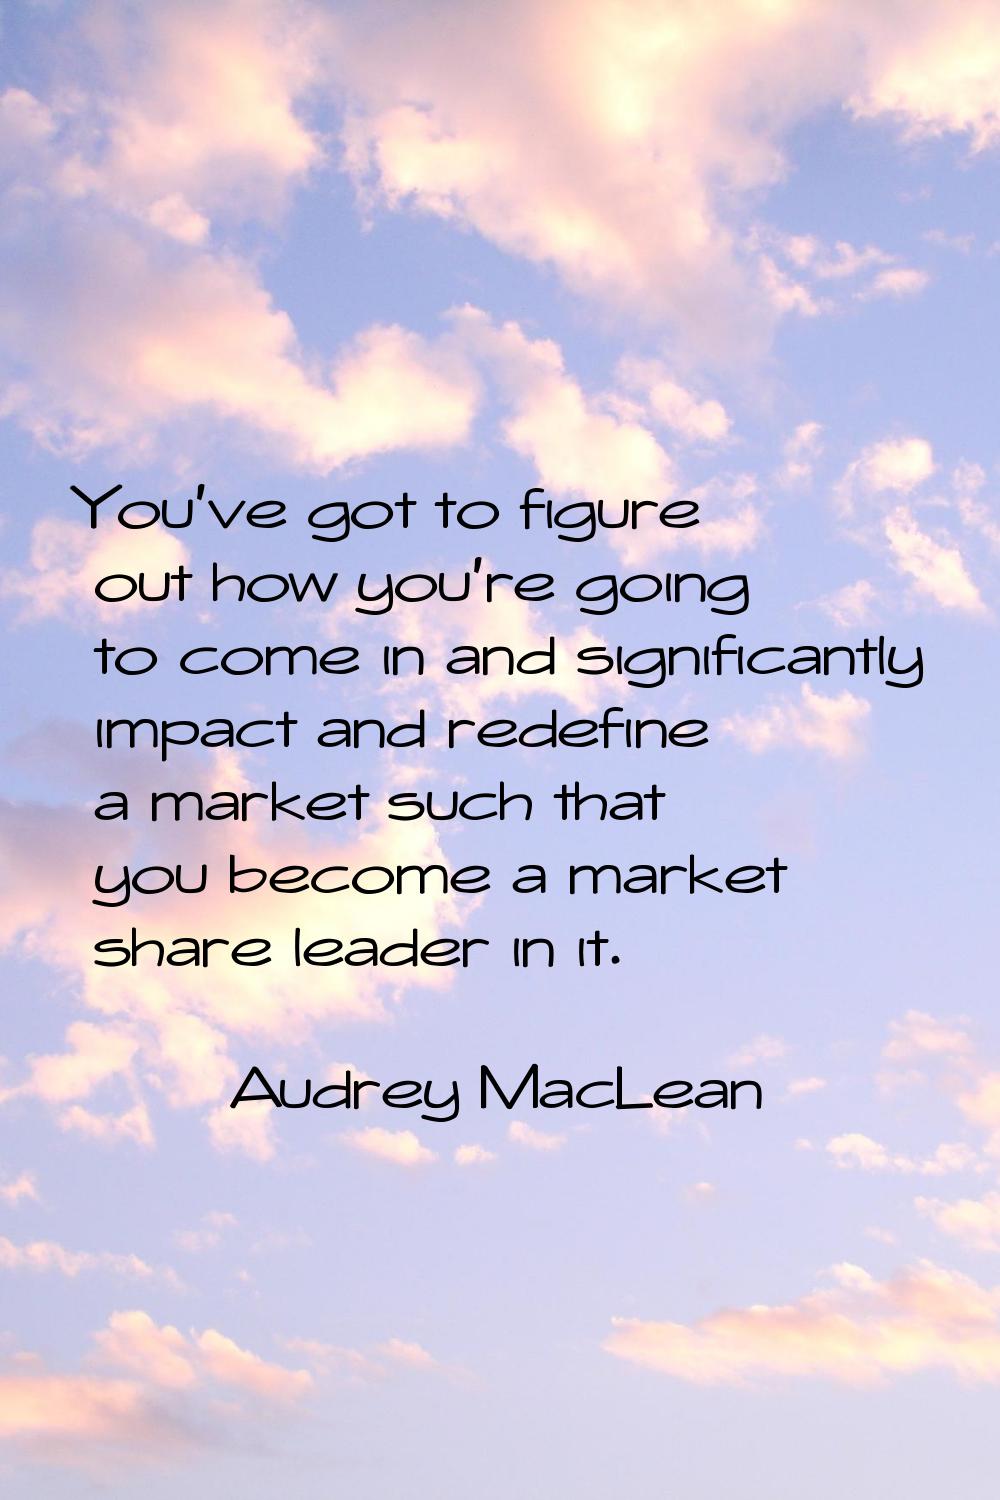 You've got to figure out how you're going to come in and significantly impact and redefine a market